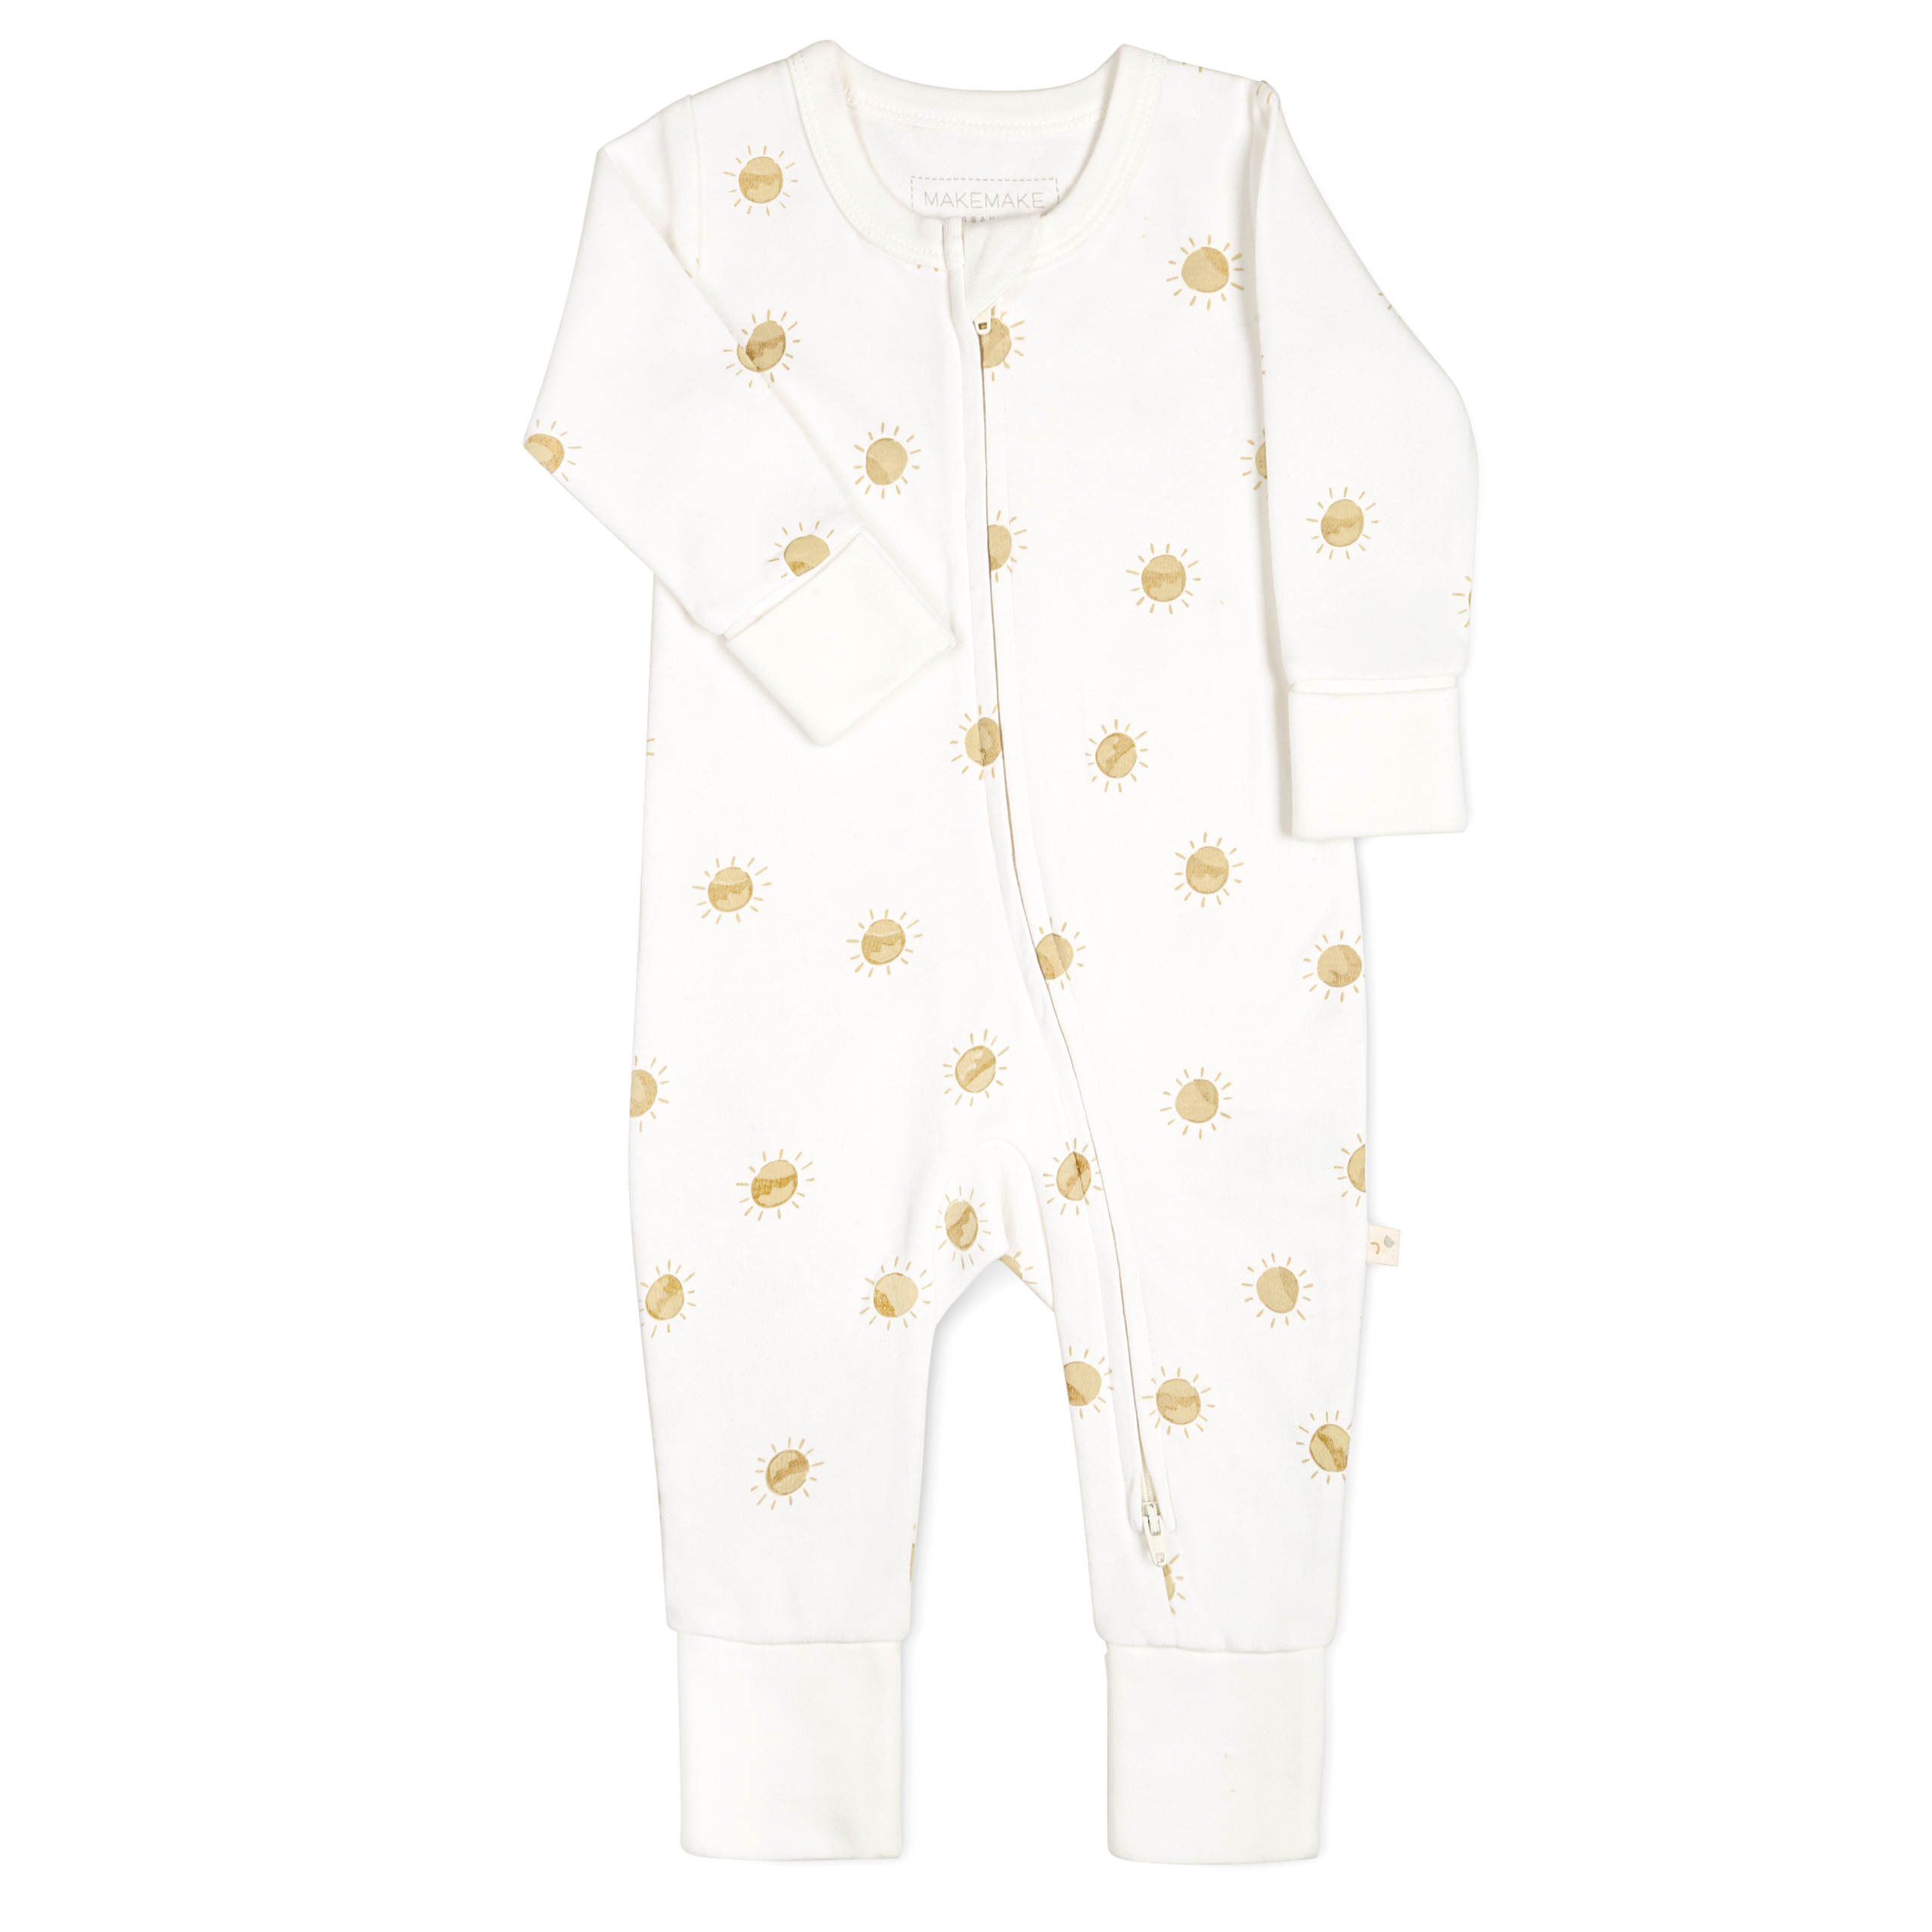 White toddler Organic 2-Way Zip Romper - Sunshine, featuring long sleeves and a front zipper, displayed against a plain, light background by Makemake Organics.